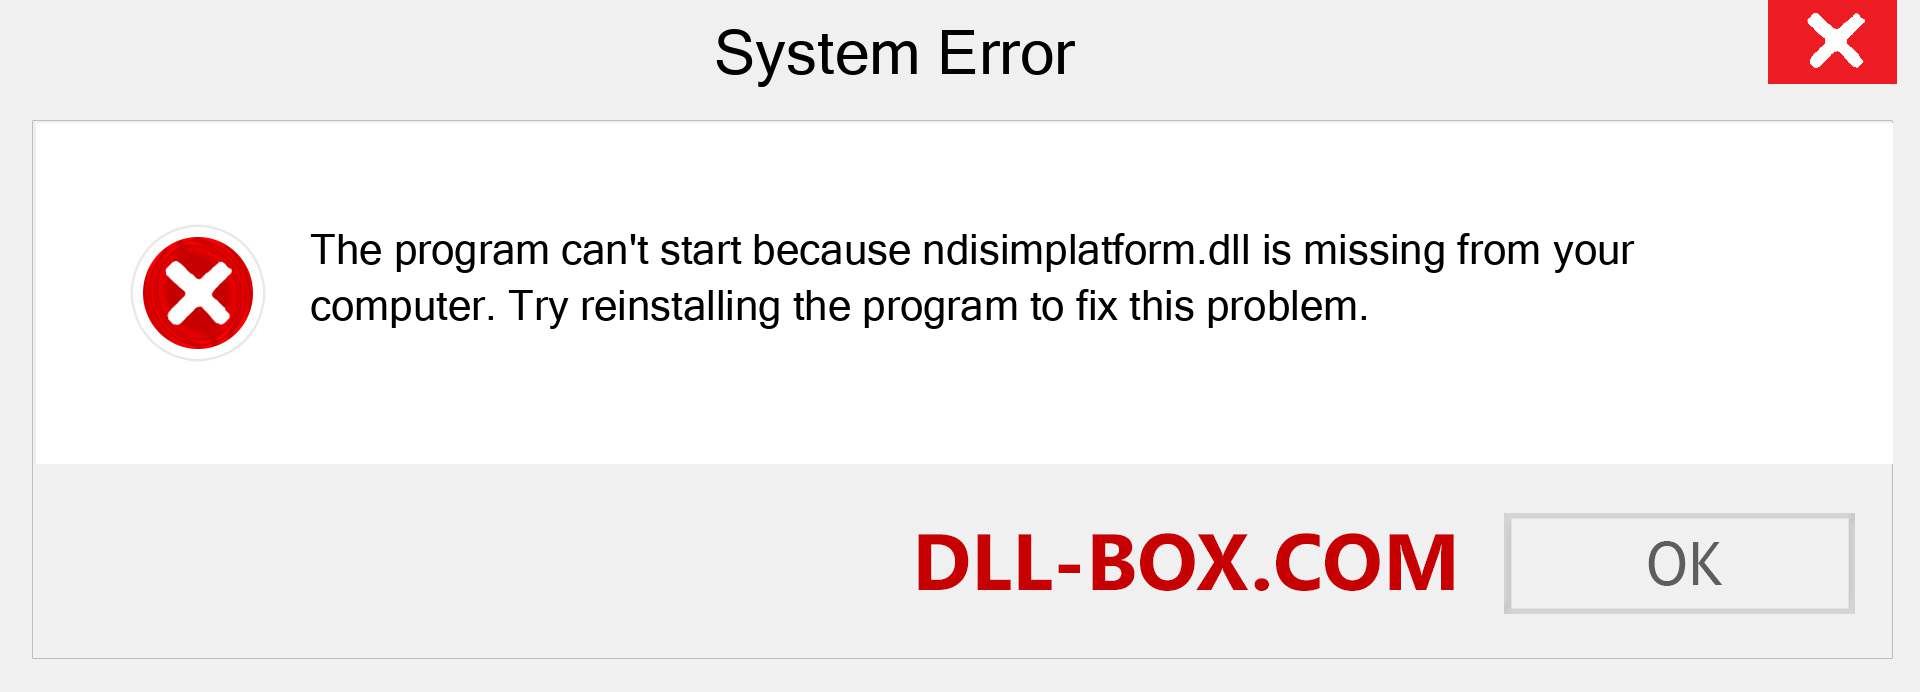  ndisimplatform.dll file is missing?. Download for Windows 7, 8, 10 - Fix  ndisimplatform dll Missing Error on Windows, photos, images